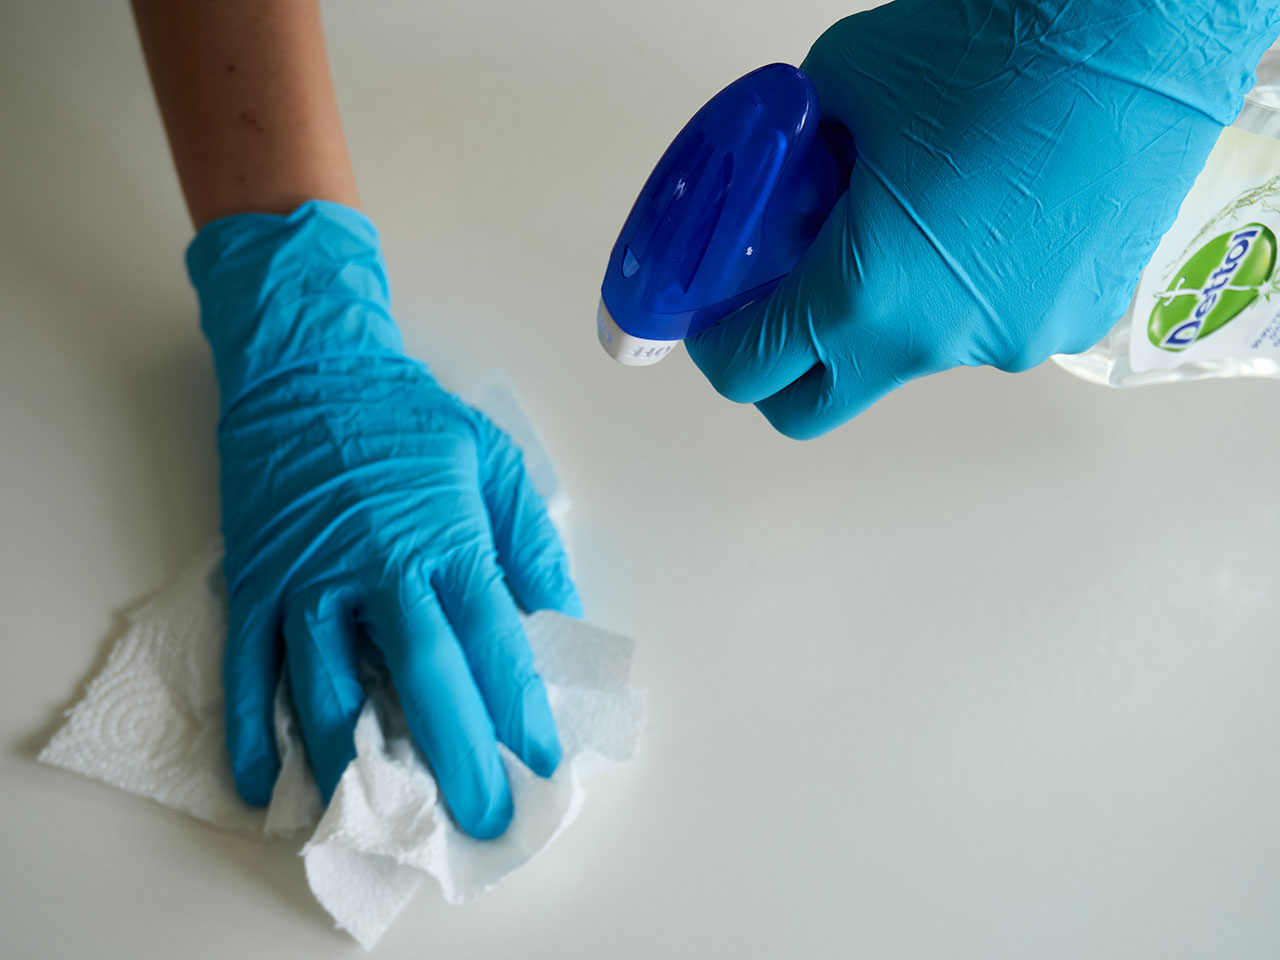 How to Be Sure Your Office Cleaner is Properly Disinfecting